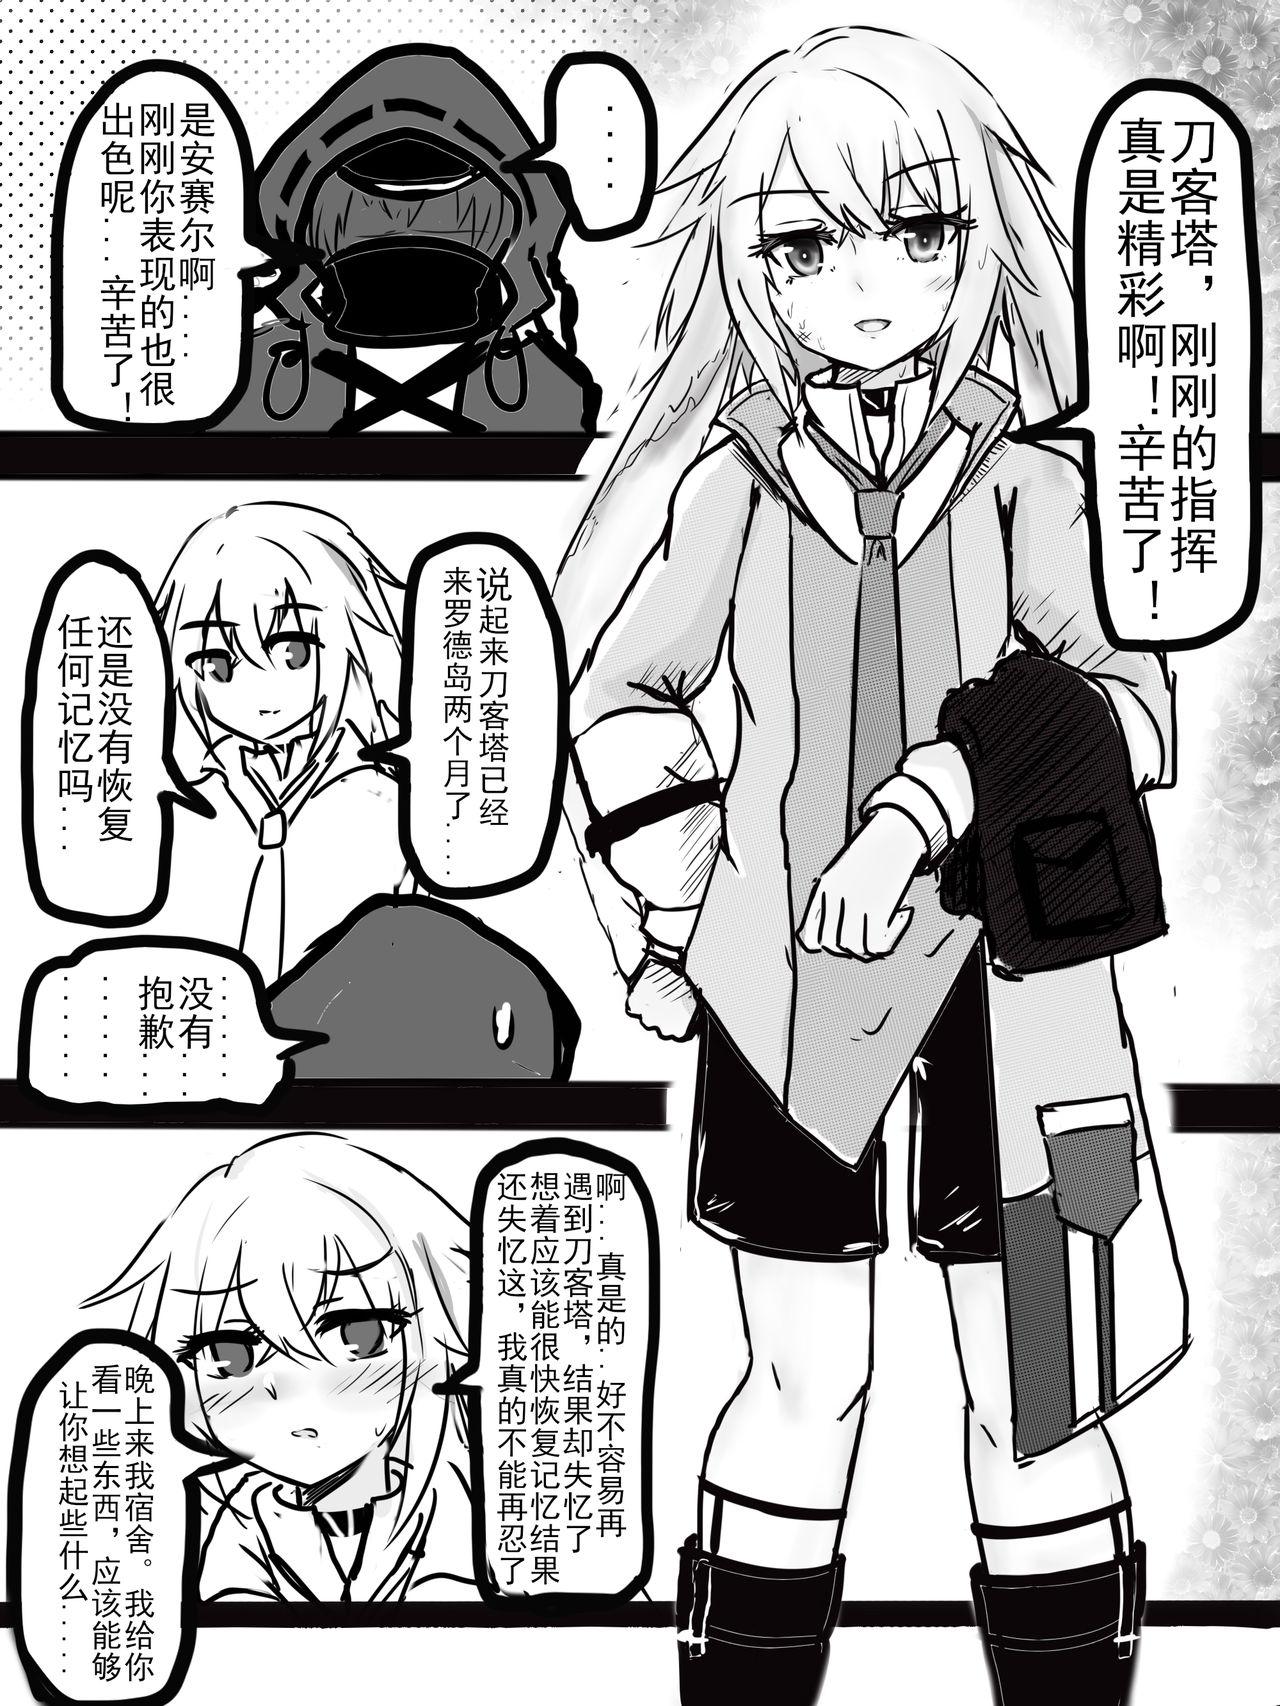 Wet Pussy 安赛尔的特别服务1 - Arknights Man - Page 3